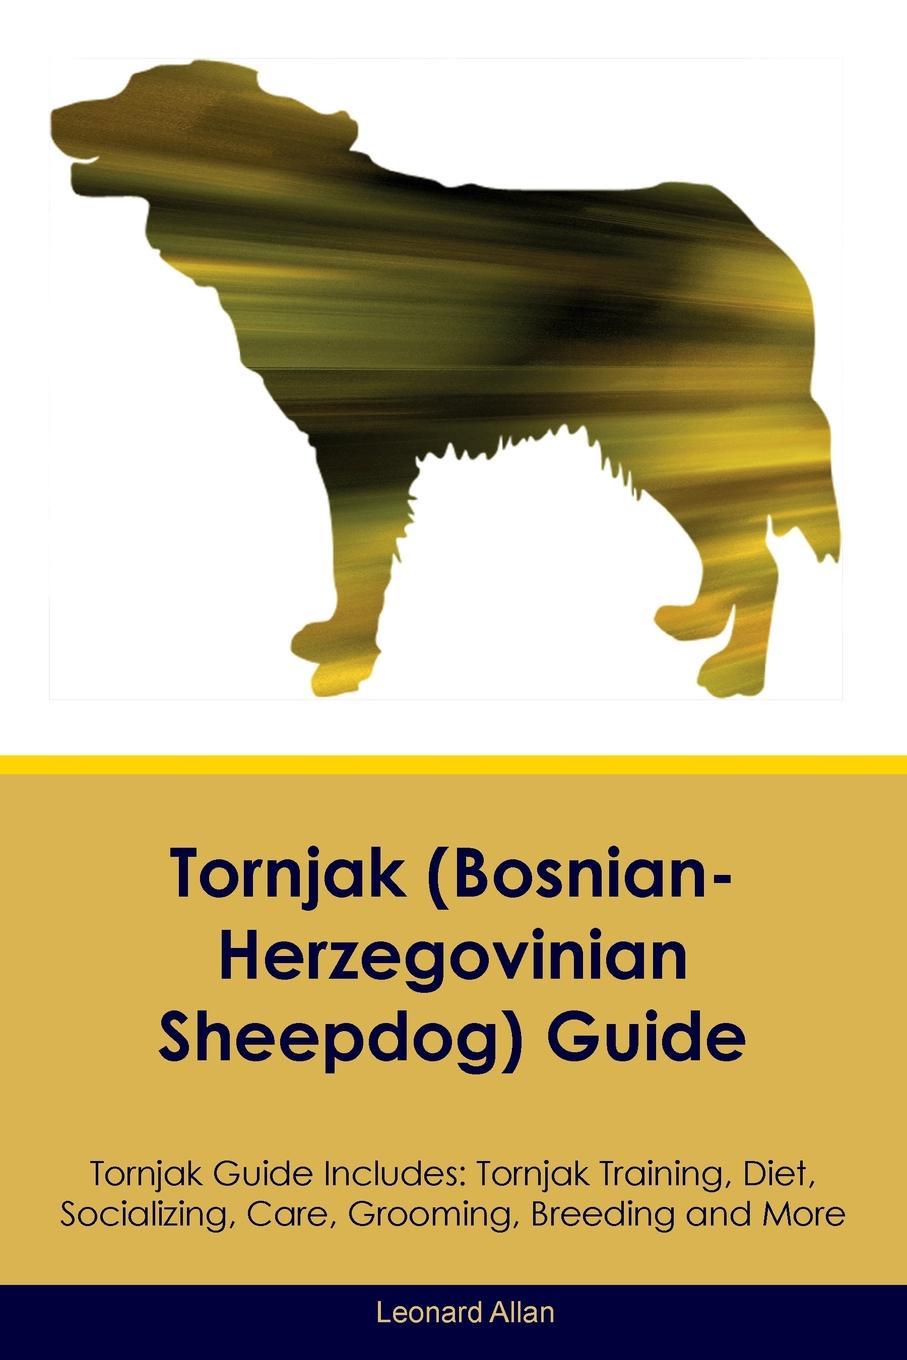 Tornjak (Bosnian-Herzegovinian Sheepdog) Guide Tornjak Guide Includes. Tornjak Training, Diet, Socializing, Care, Grooming, Breeding and More